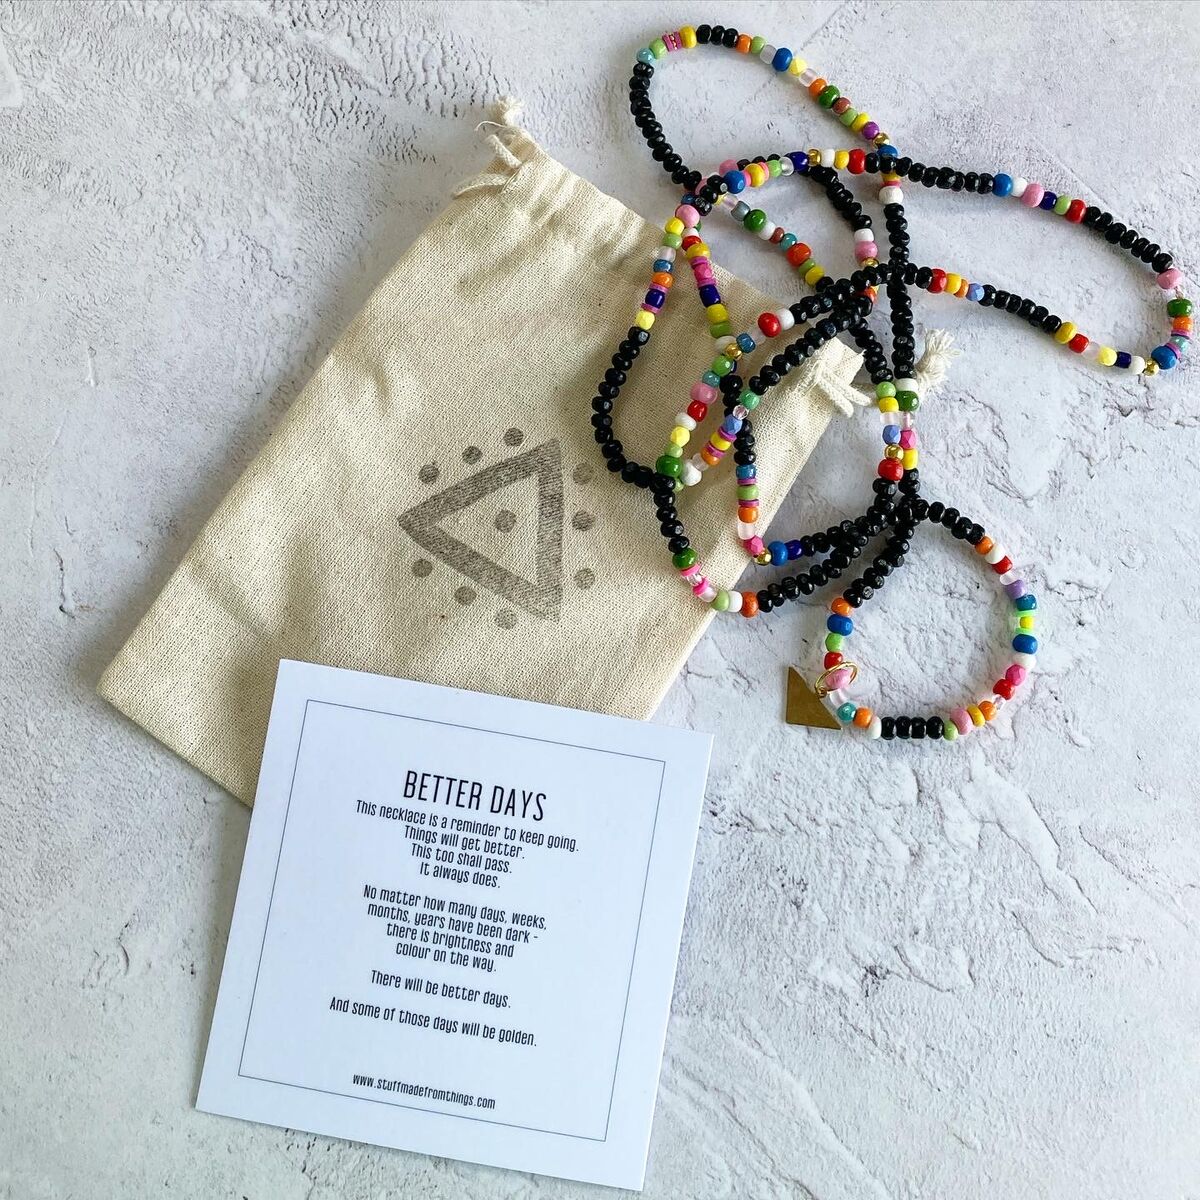 Stuff Made From Things - Better Days Beaded Long Necklace